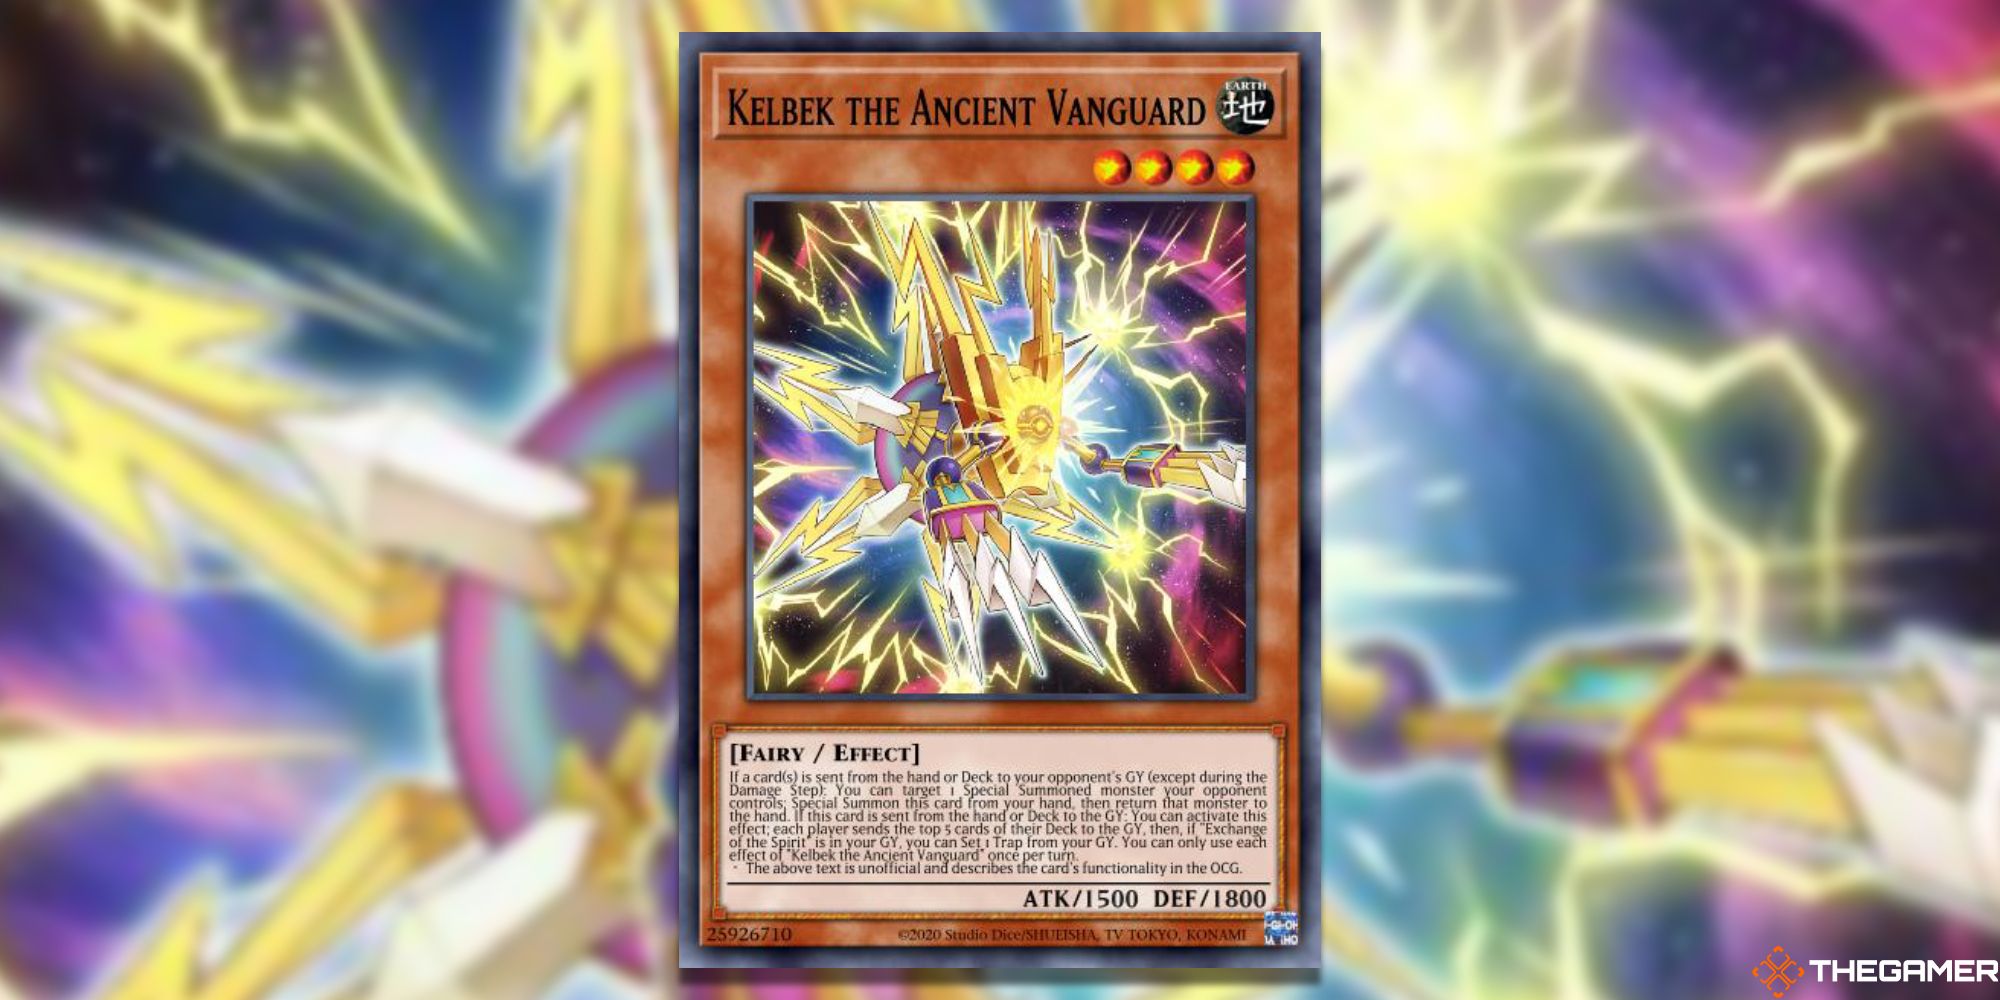 Full card art of Querbec from Ancient Vanguard using Gauss Blur from Yu-Gi-Oh!master duel